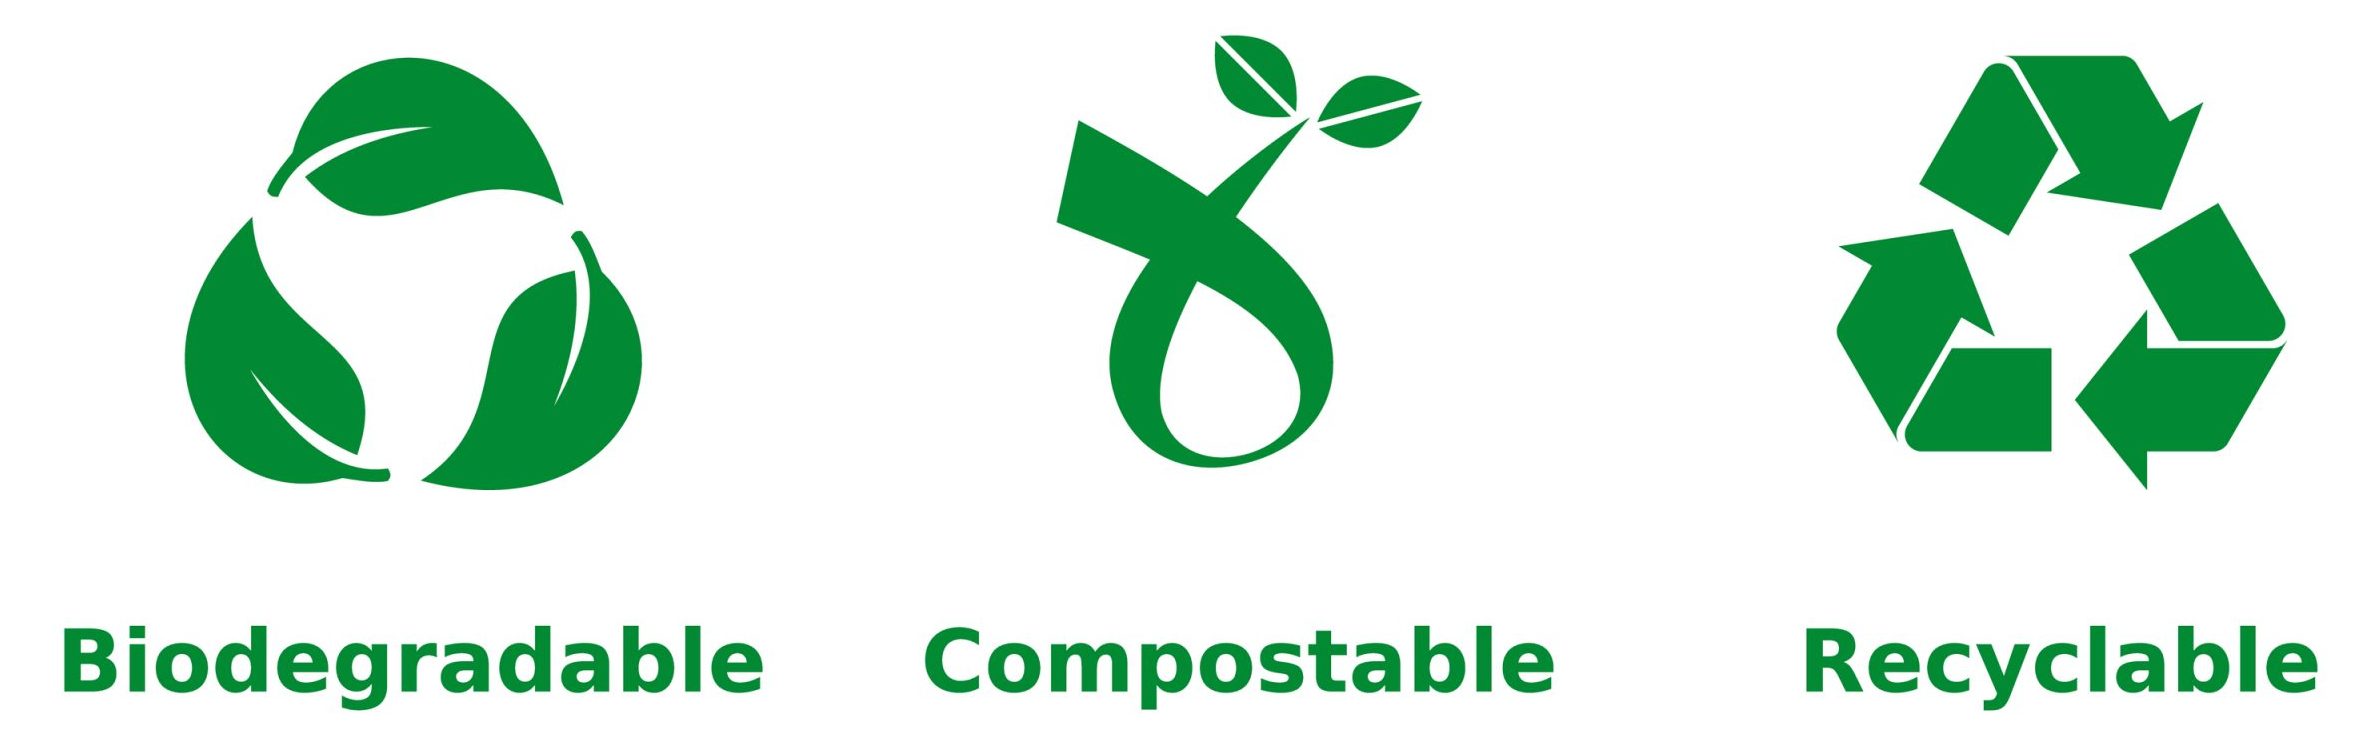 The internationall recognized symbols for Biodegradable, Compostable, and Recyclable.